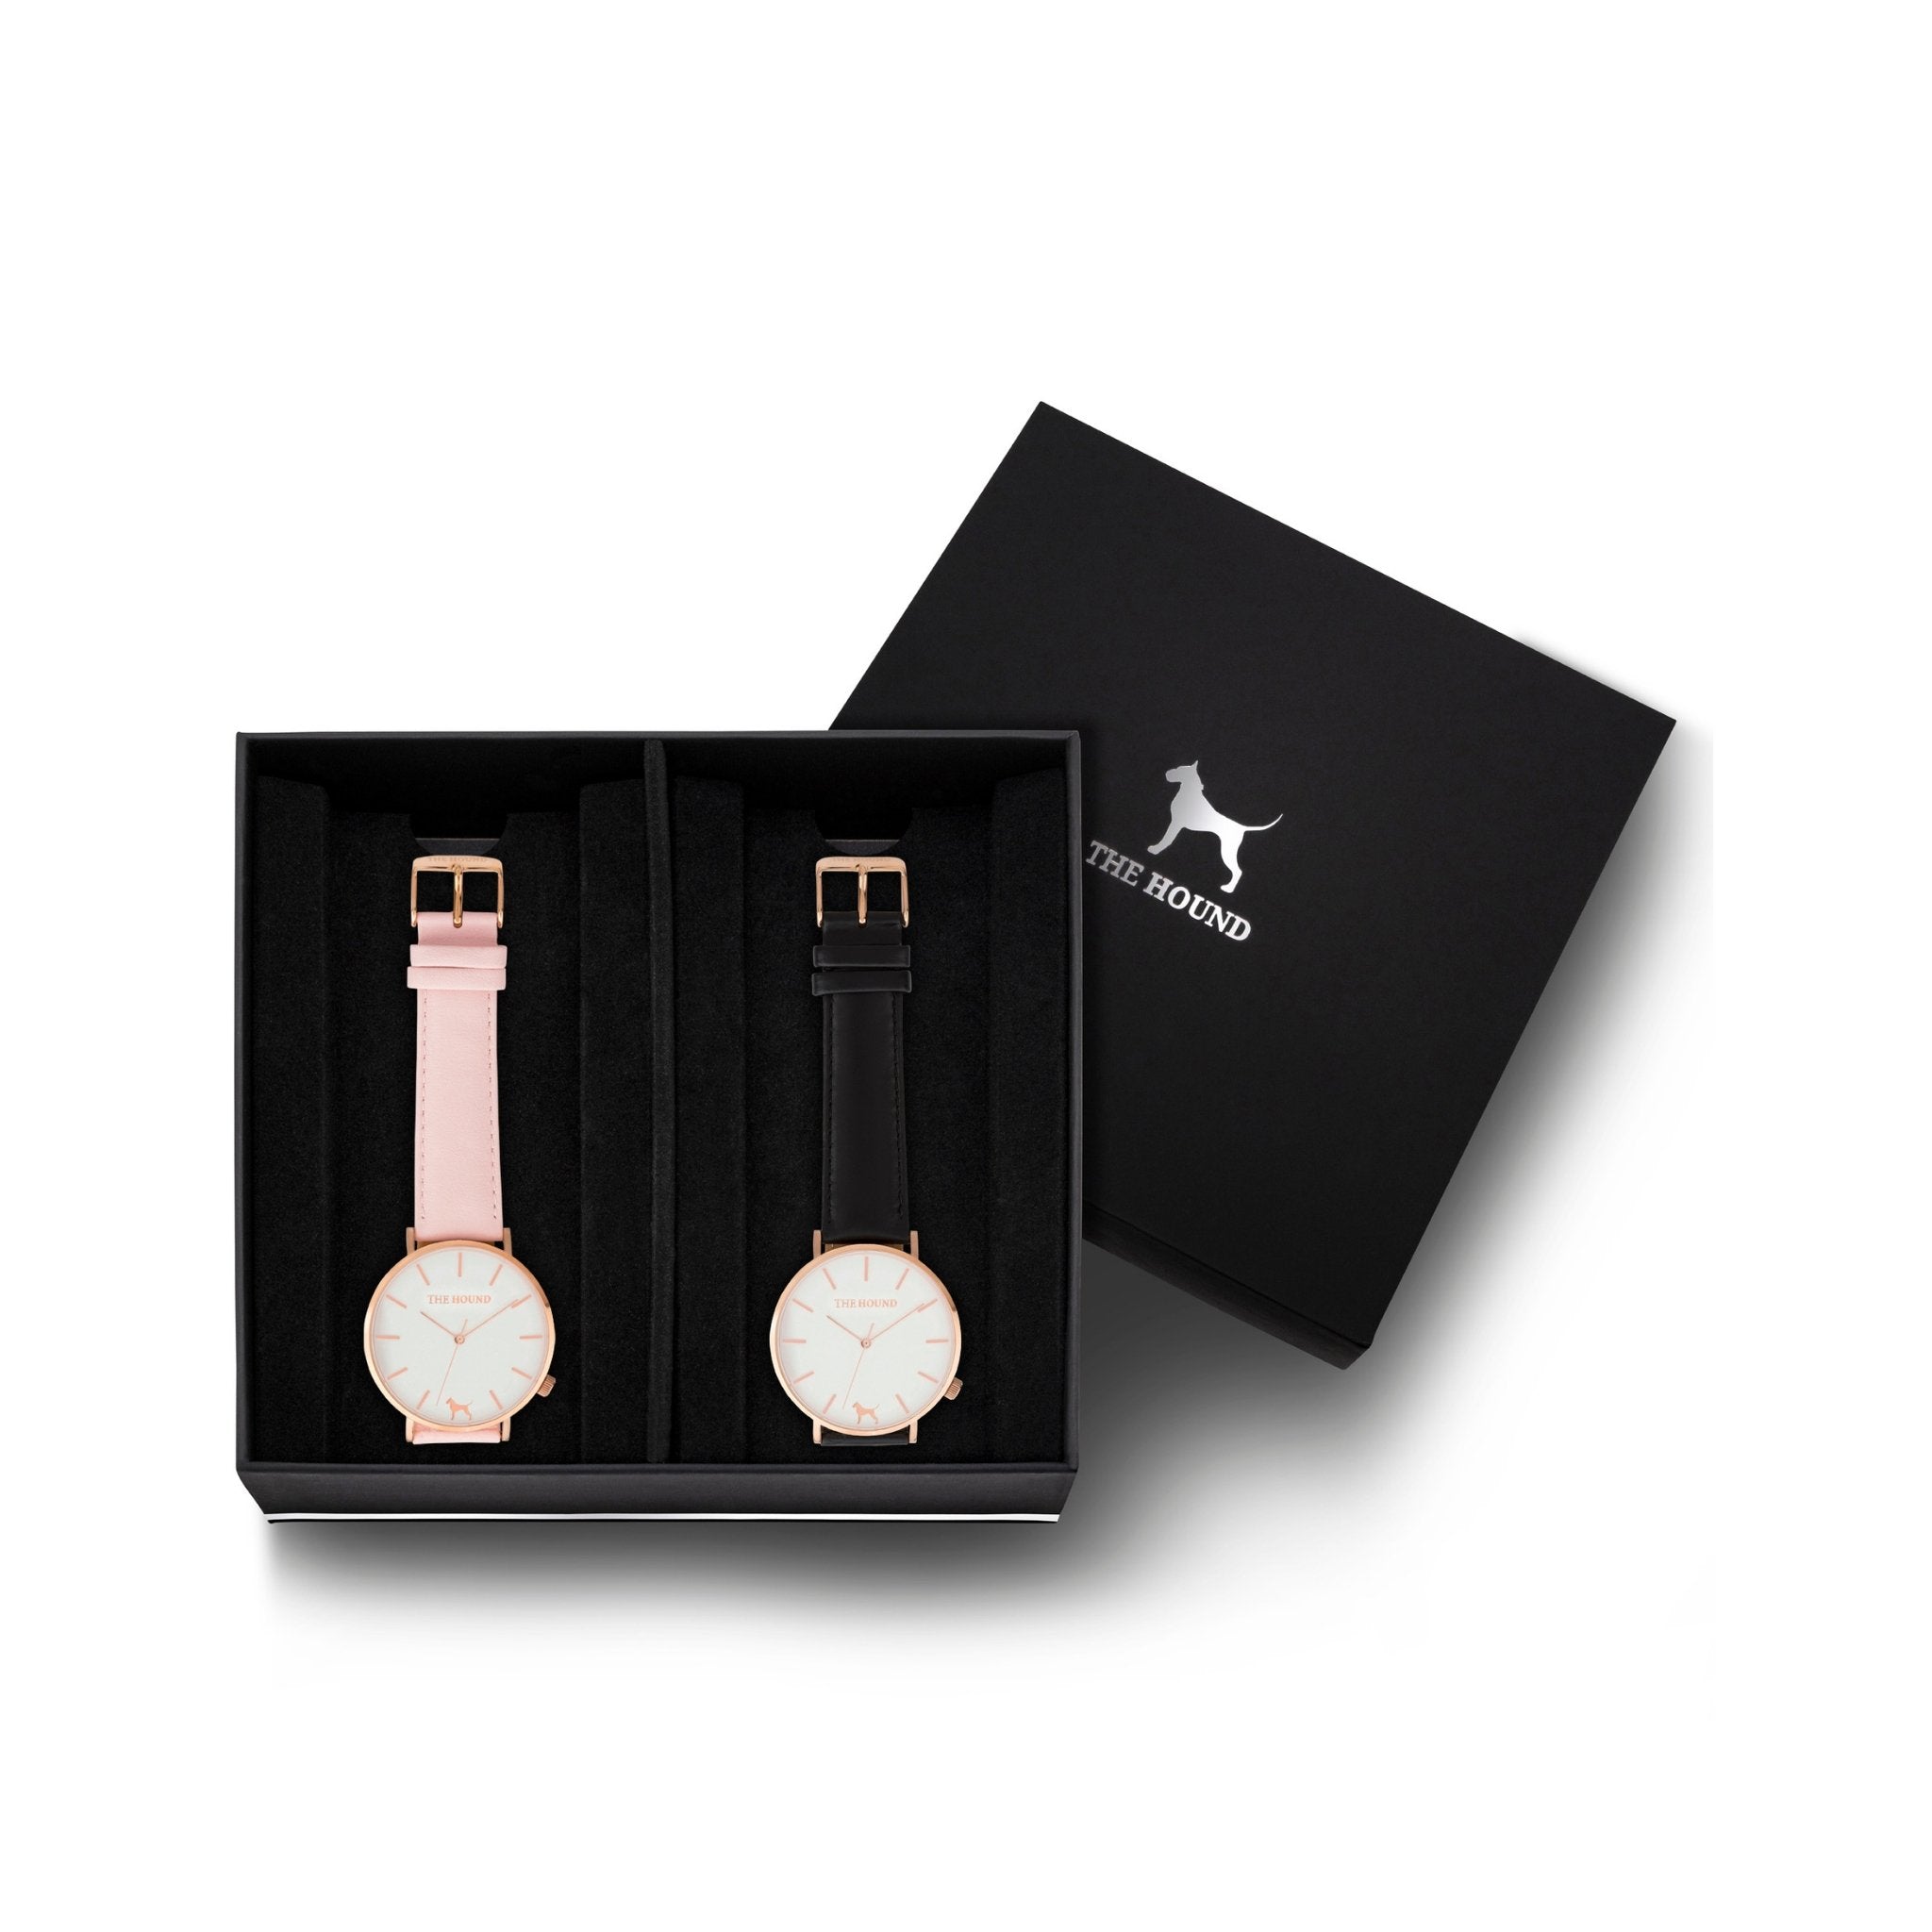 Custom gift set - Rose gold and white watch with stitched blush pink genuine leather band and a rose gold and white watch with stitched black genuine leather band